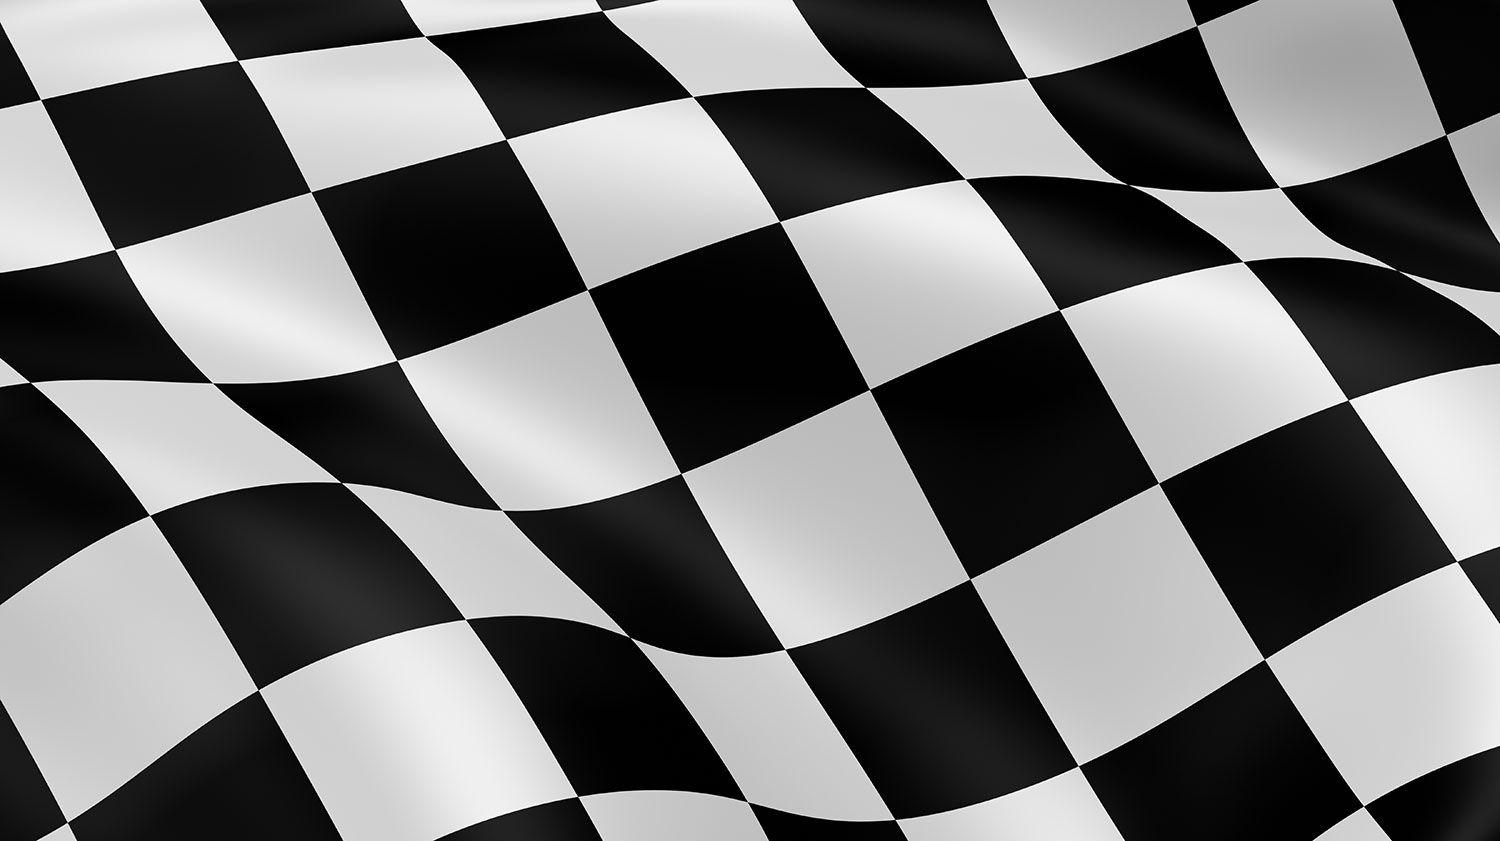 download finish line checkered flag